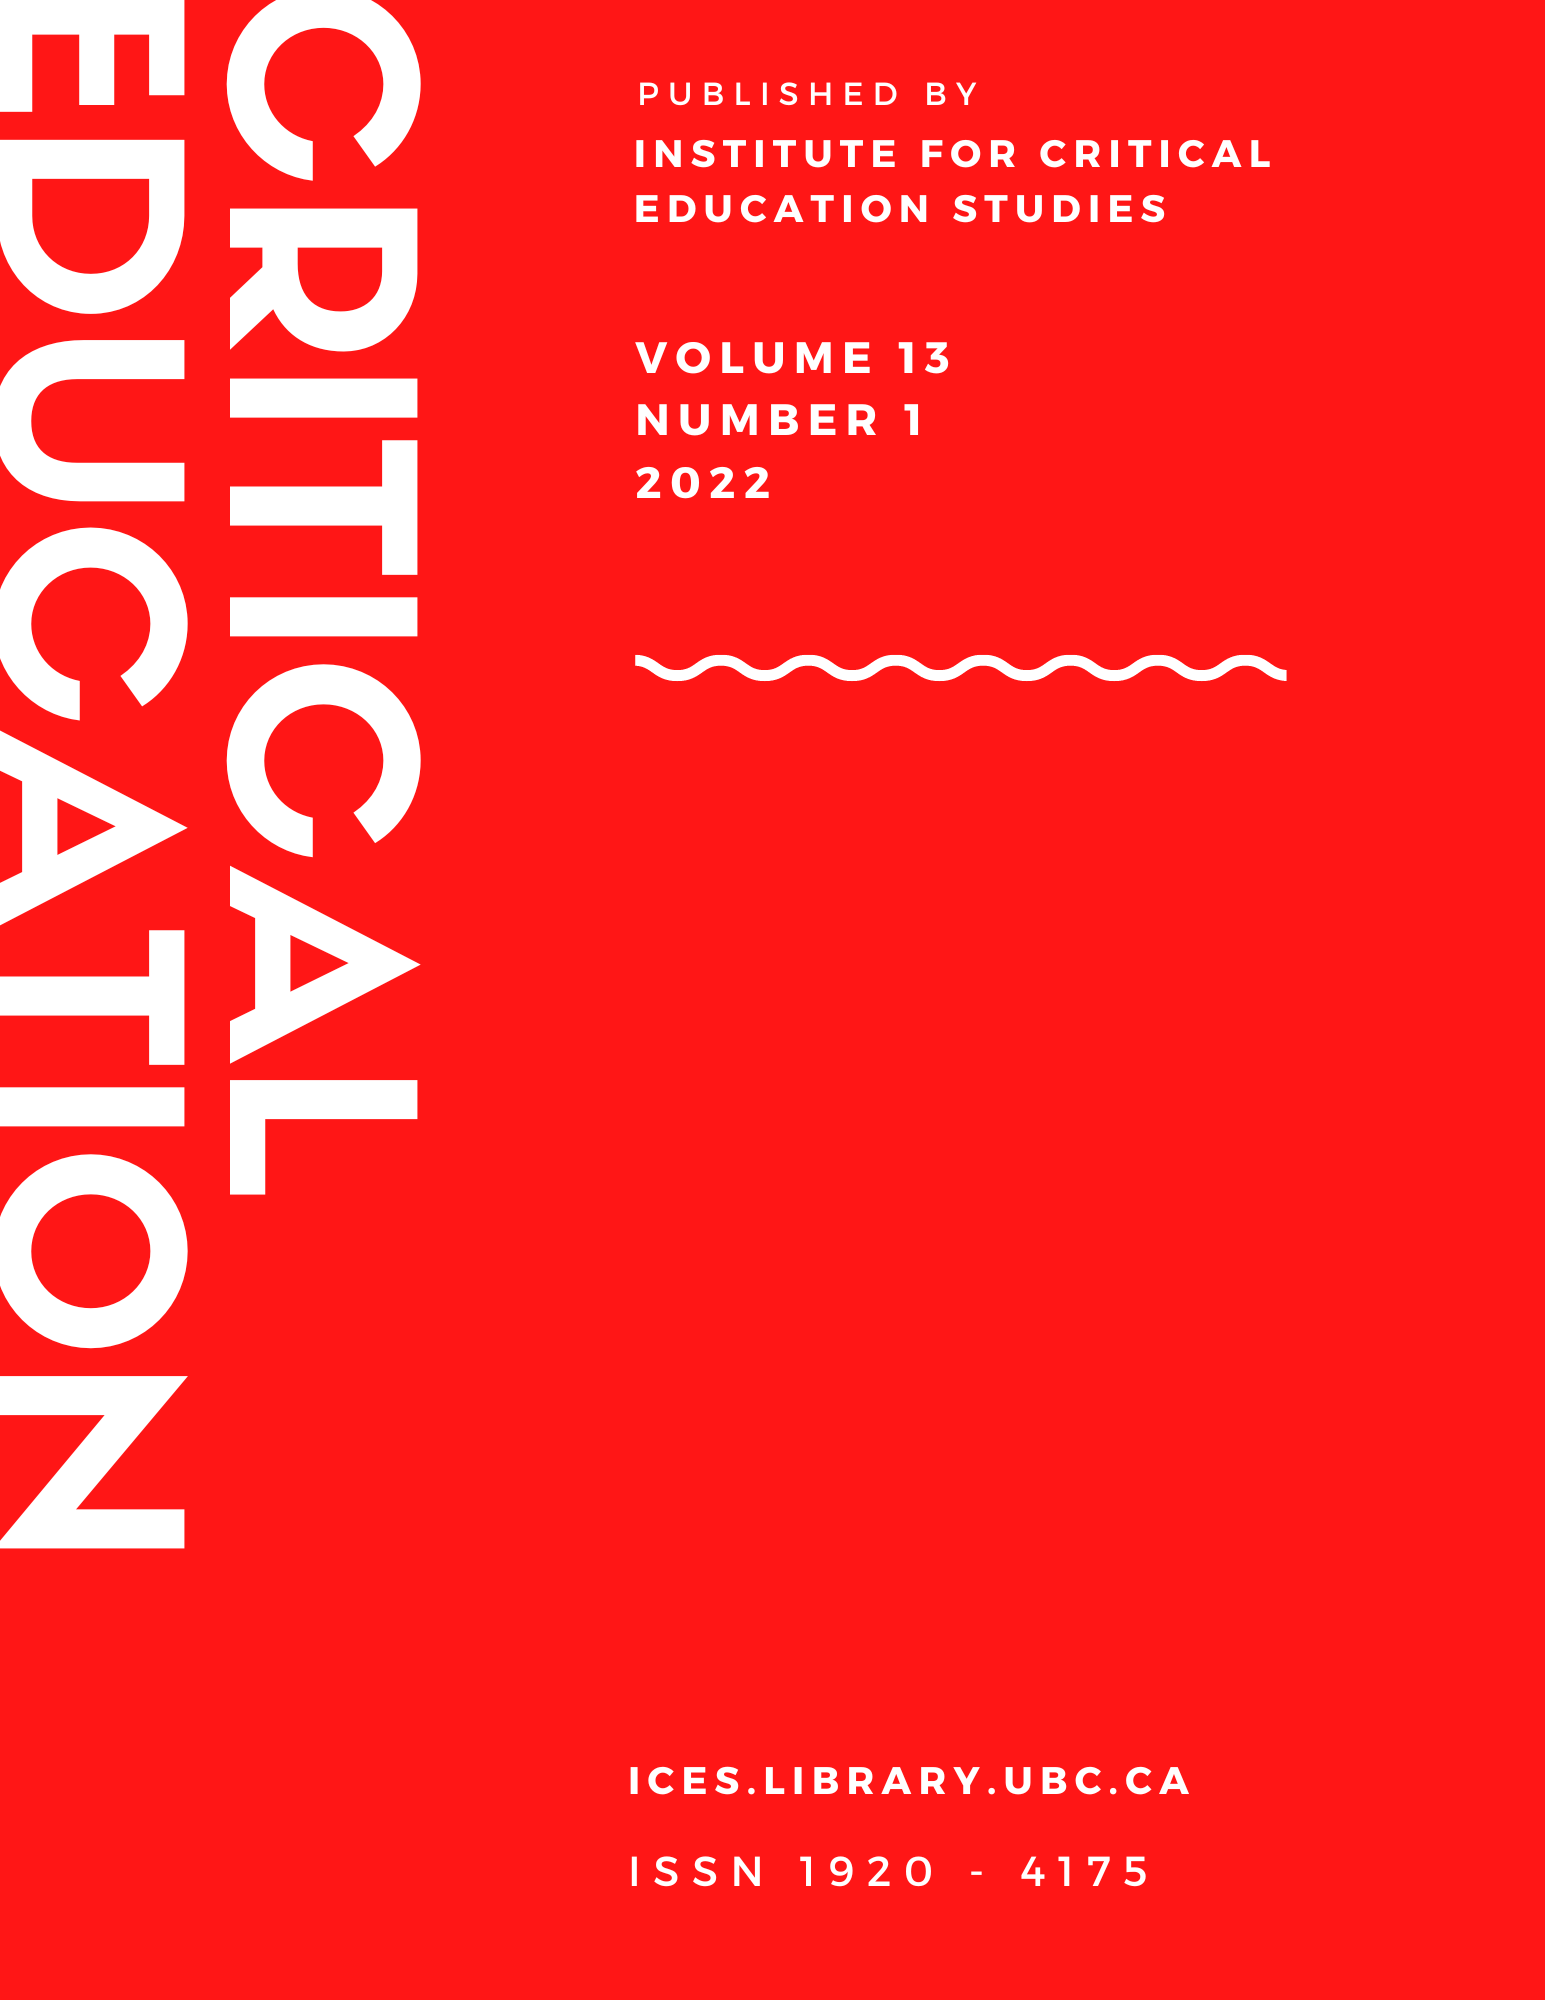 Critical Education Volume 13 Number 1 2022